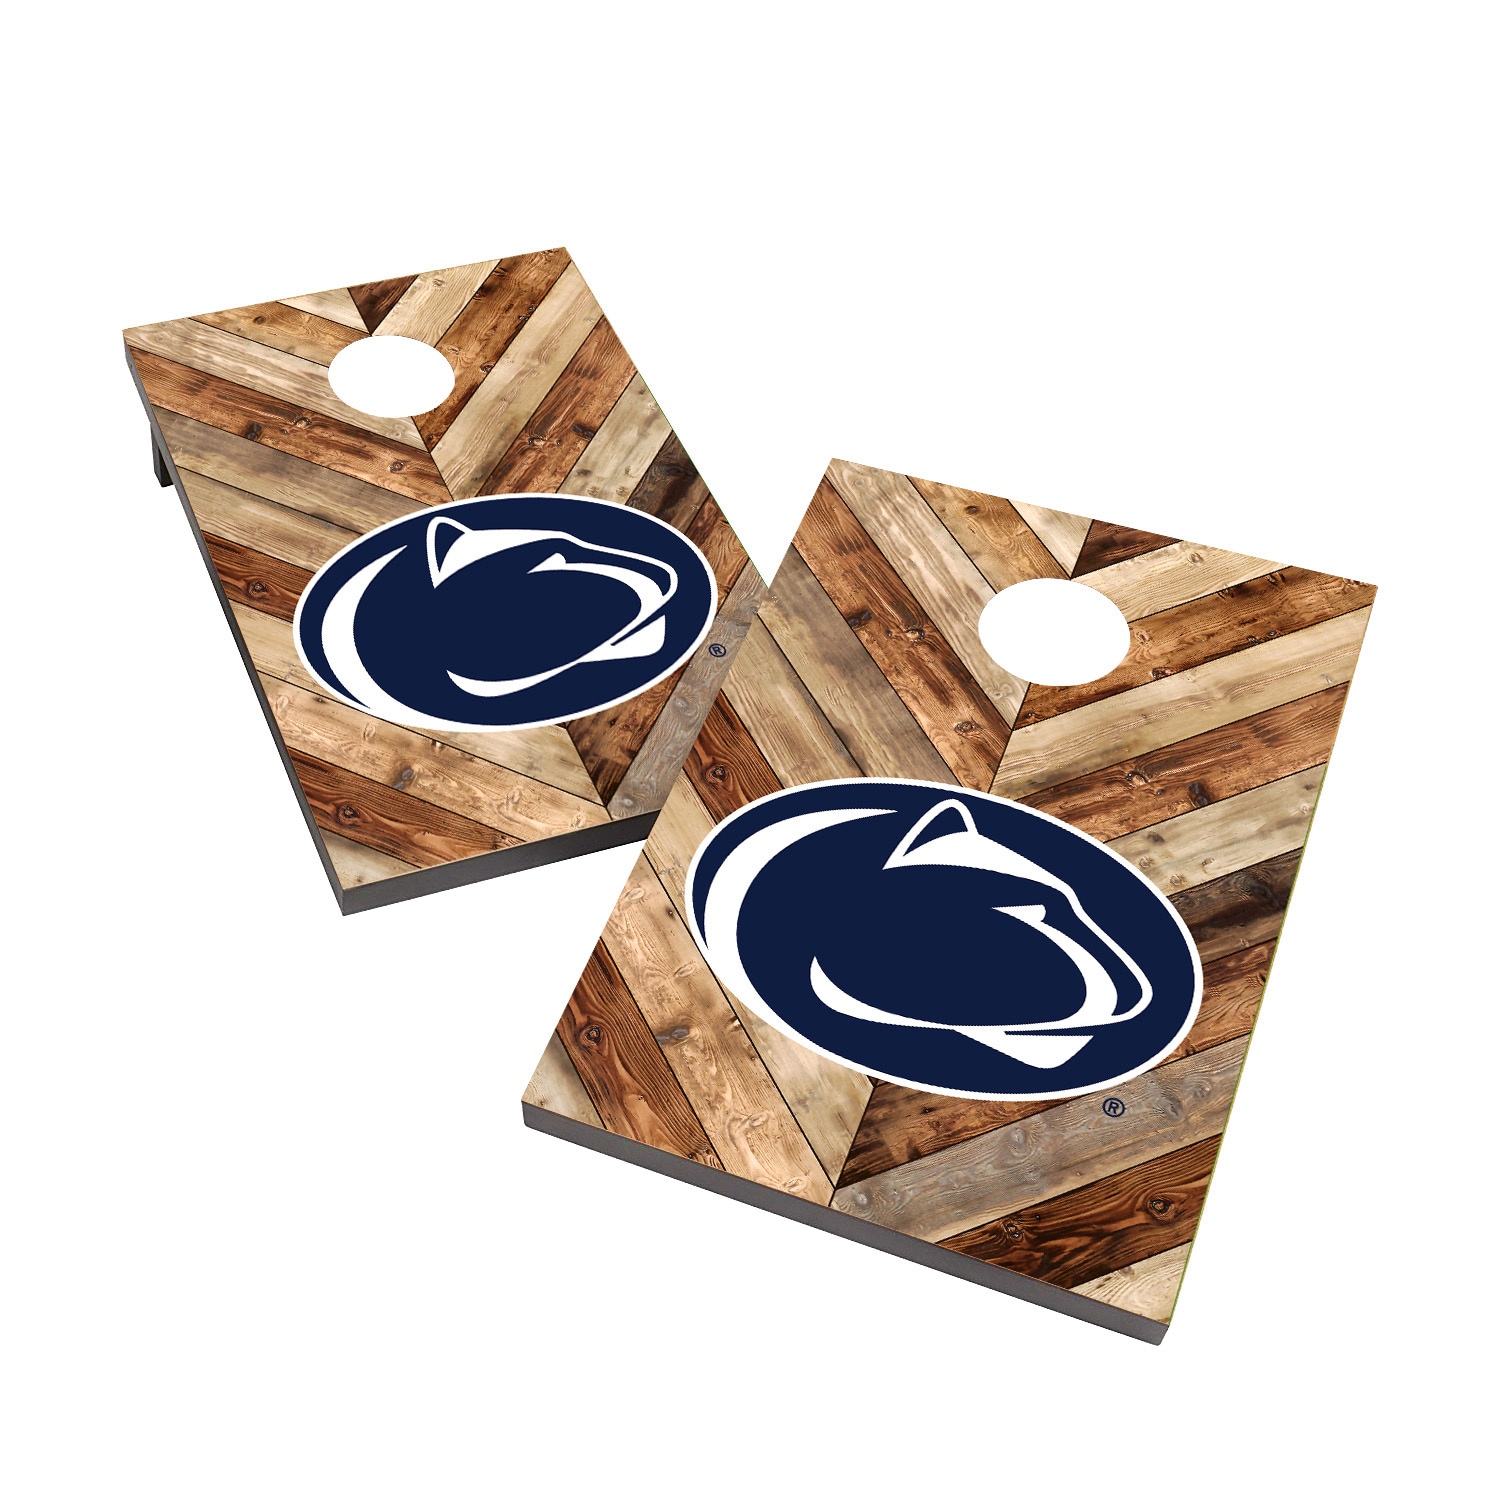  Duck House NCAA Penn State Nittany Lions Bag in Pouch